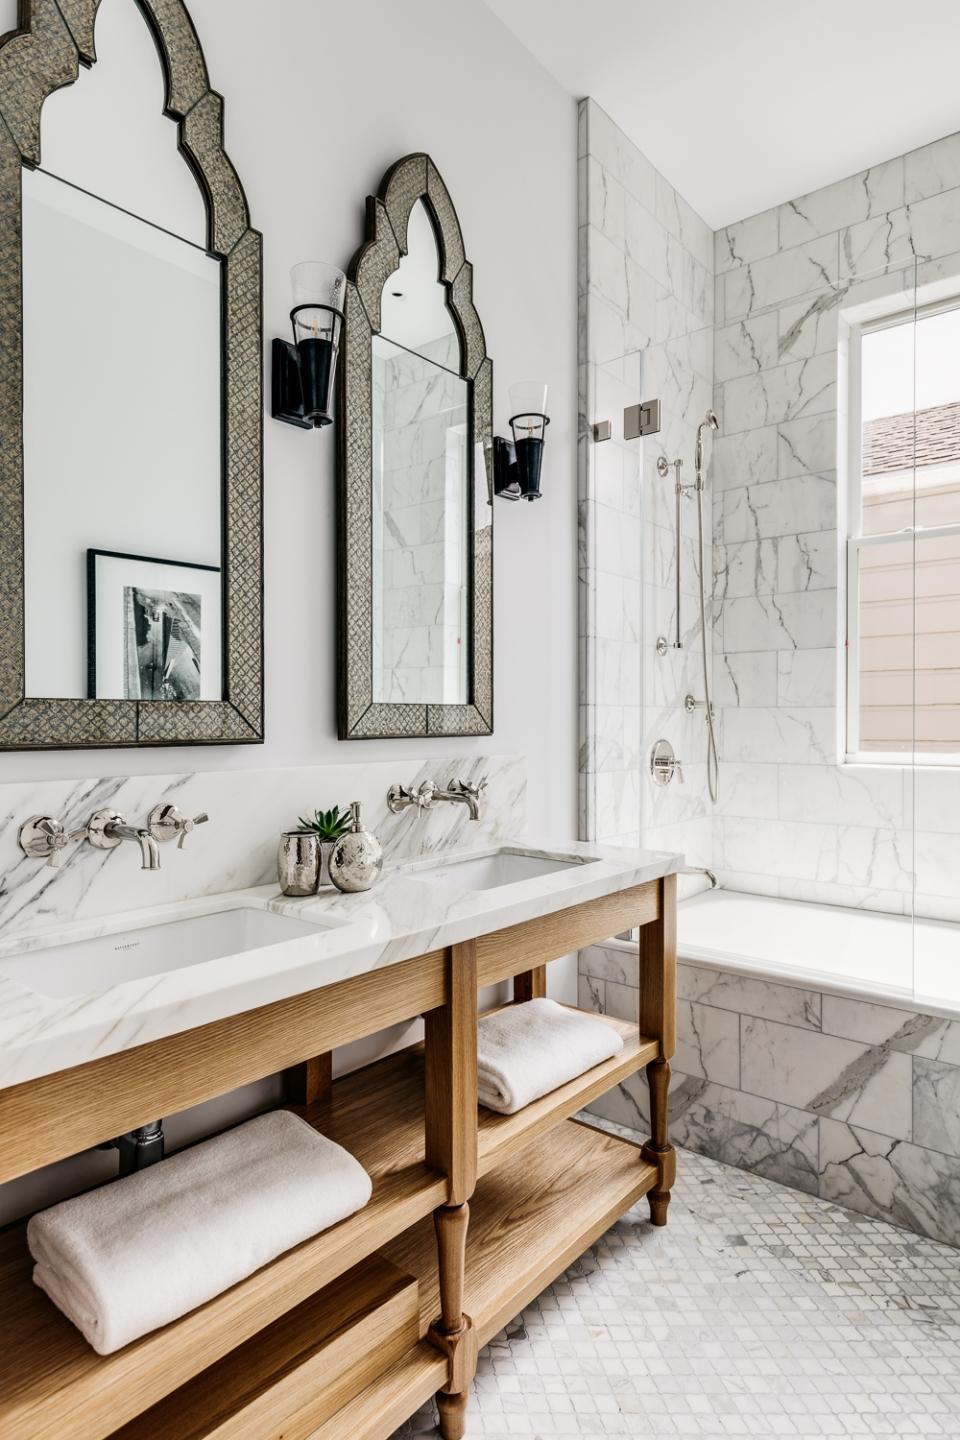 Marble finishes and shiny tiles commingle with wood and natural materials to meld luxury and rustic charm in two of the home's four bathrooms